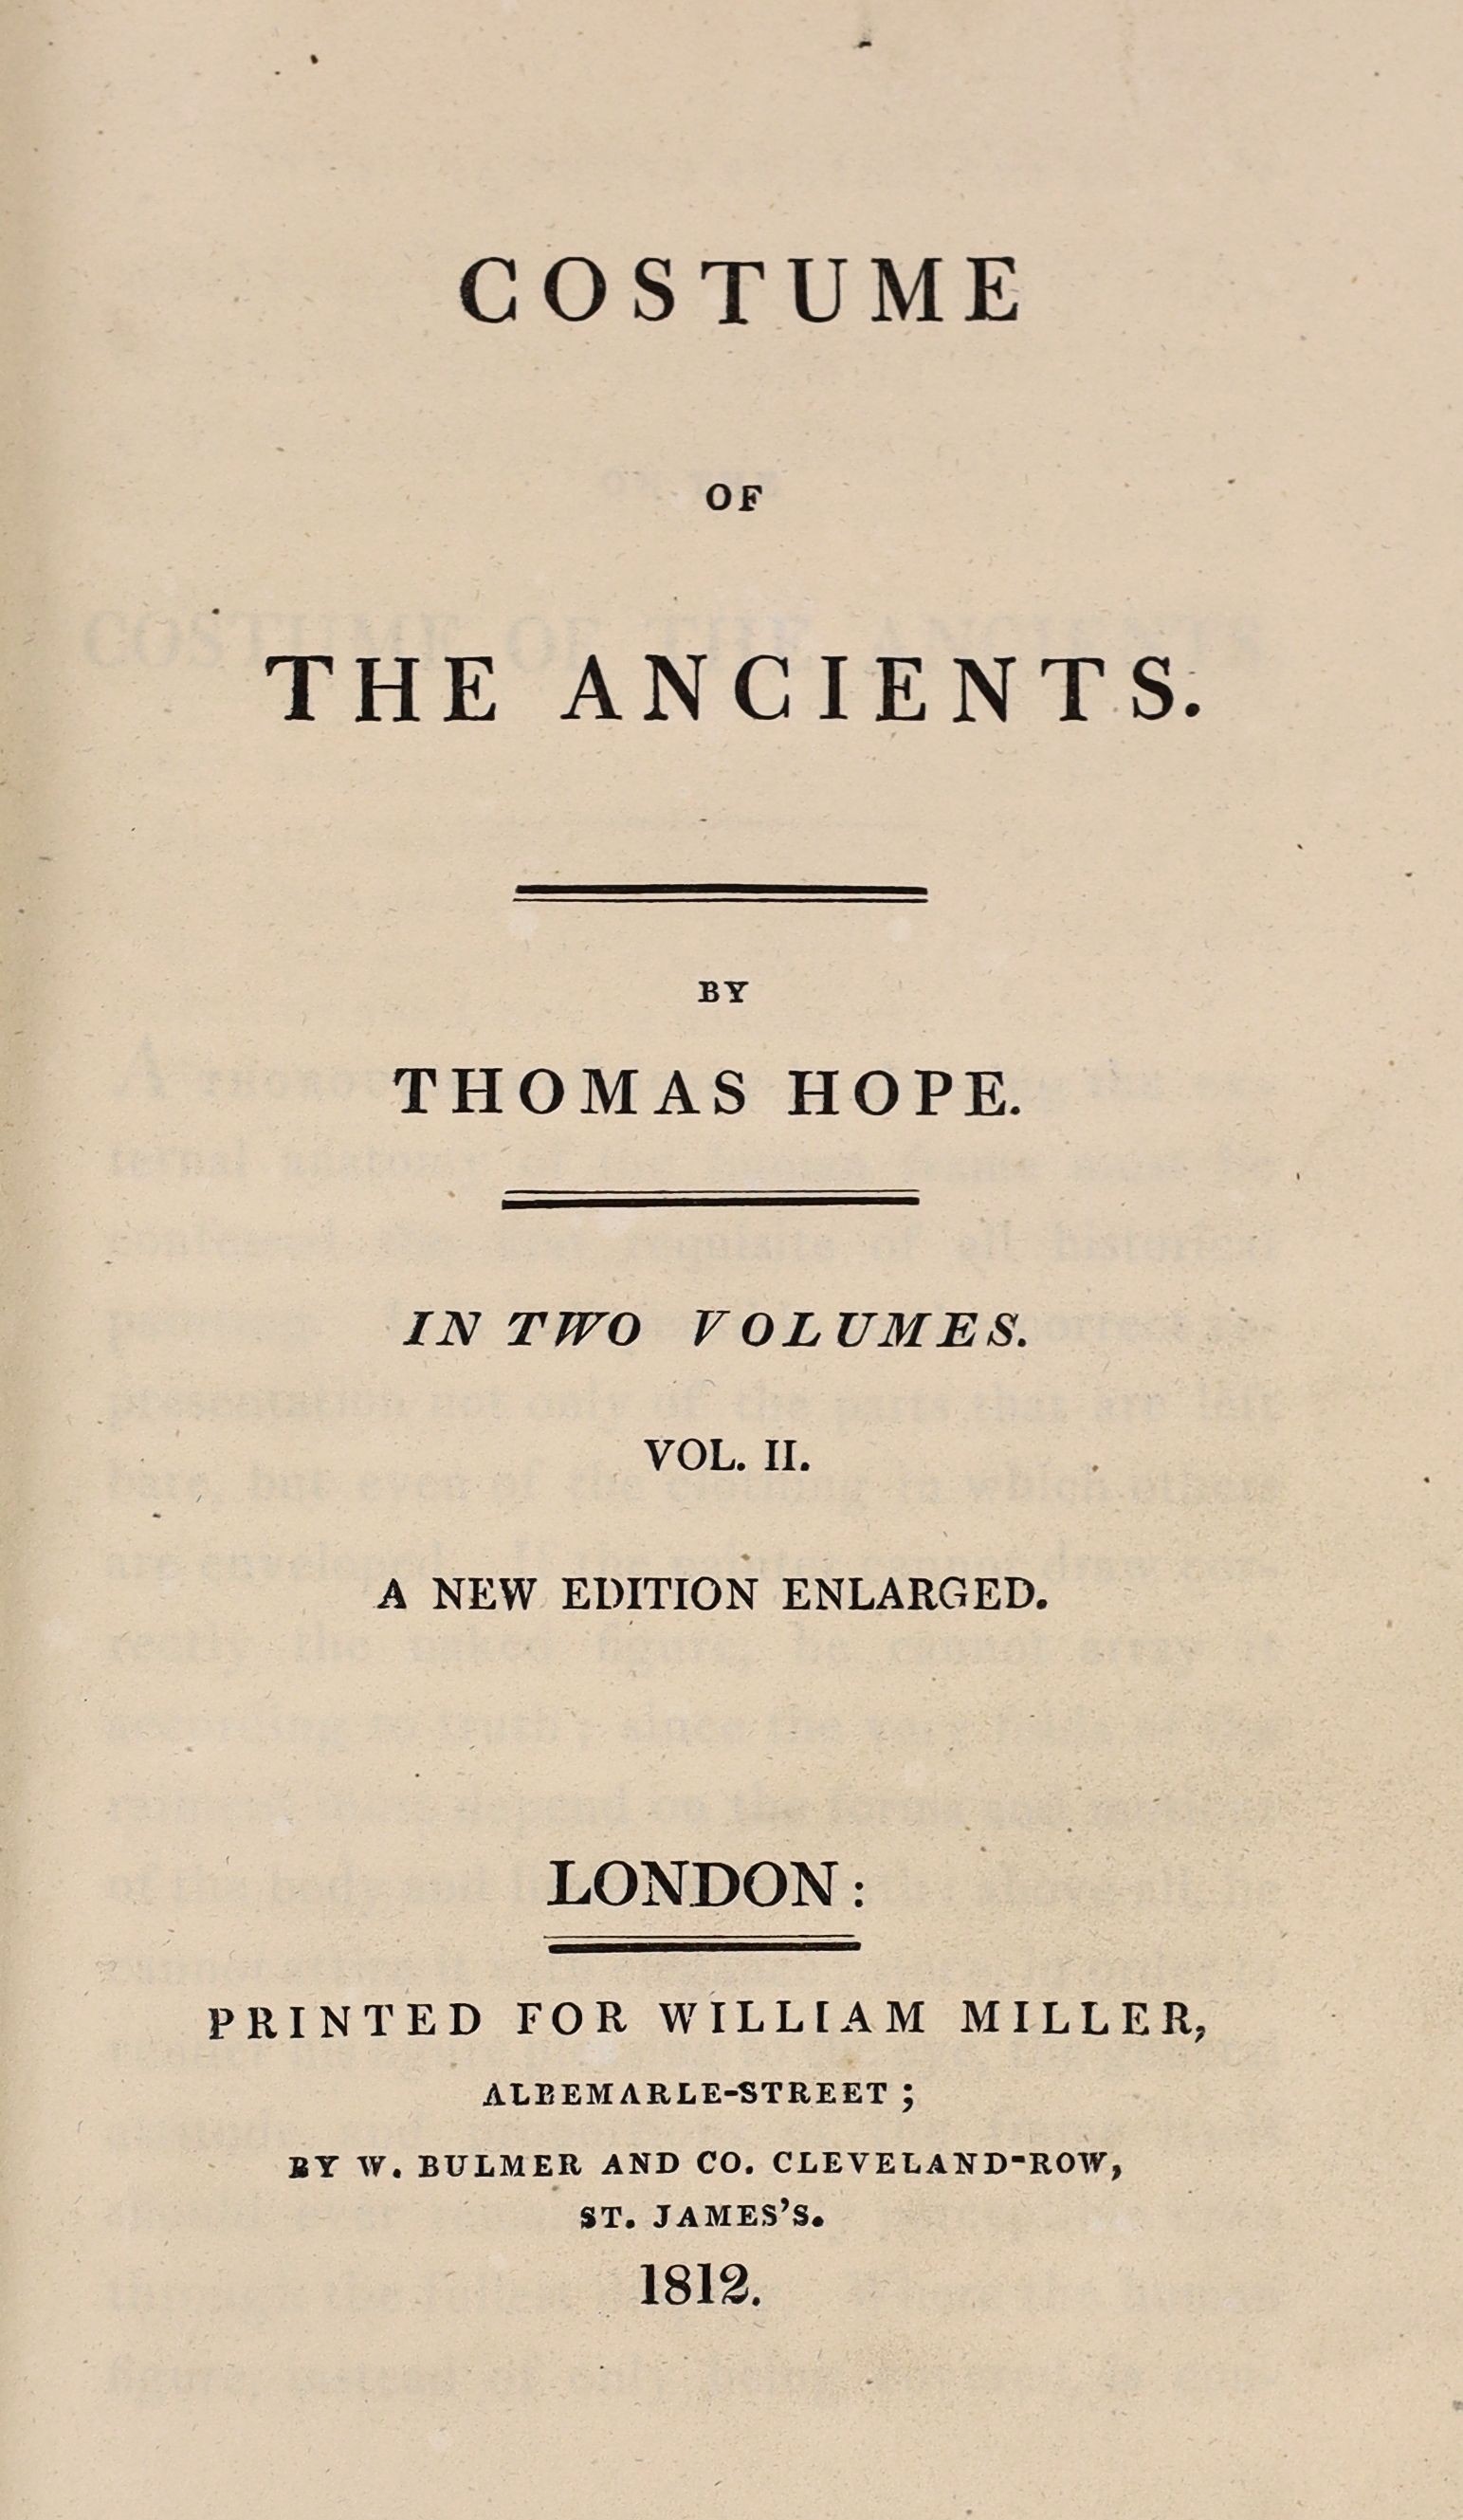 Hope, Thomas - Costume of the Ancients, 2nd edition, 2 vols in 1, 4to, later blind stamped leather gilt, 300 engraved plates, London, 1812